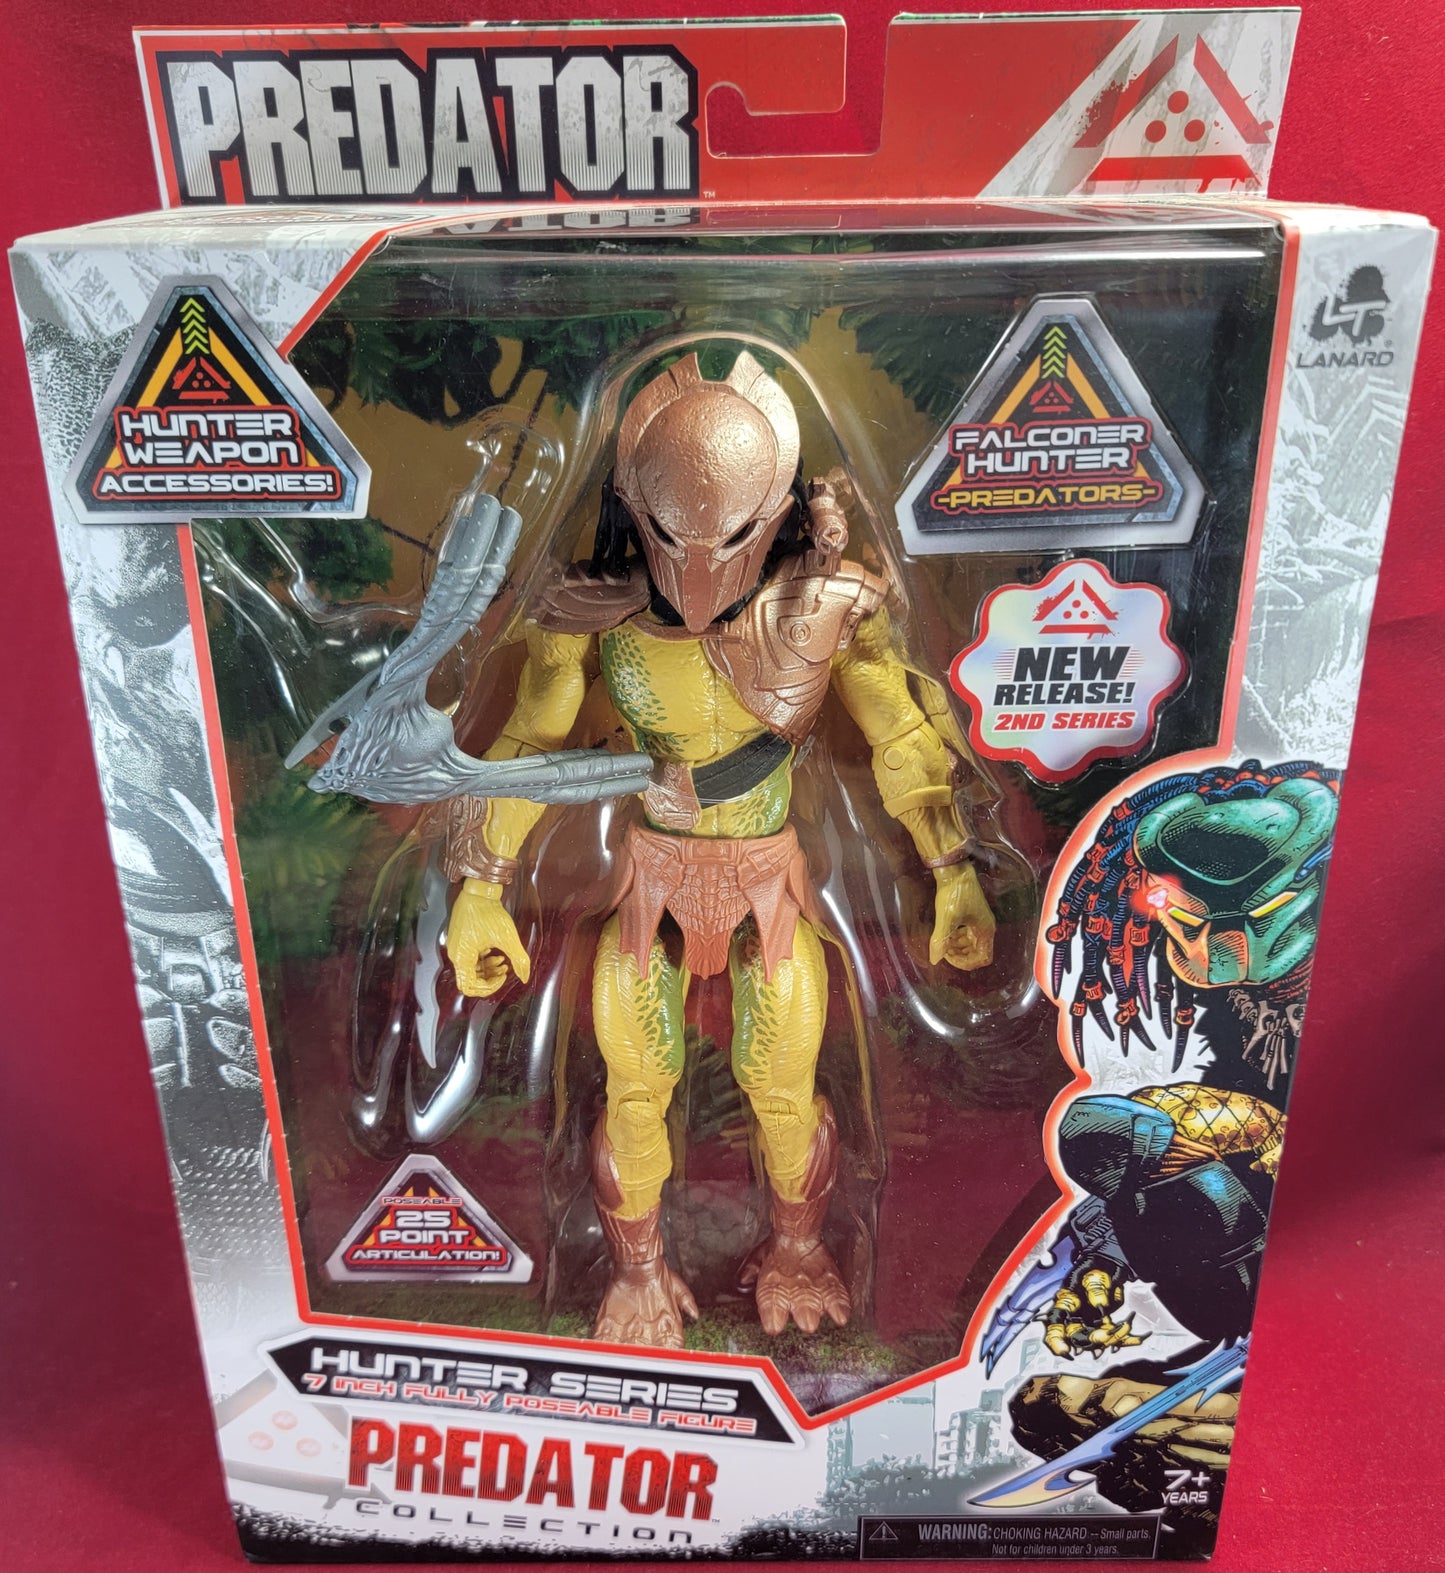 7 inch falconer hunter predator (nib) Brand new fully poseable Wal-Mart exclusive jungle hunter predator. 25 point articulation figure from lanard. Excellent condition except for one of the weapons is loose in the packaging.